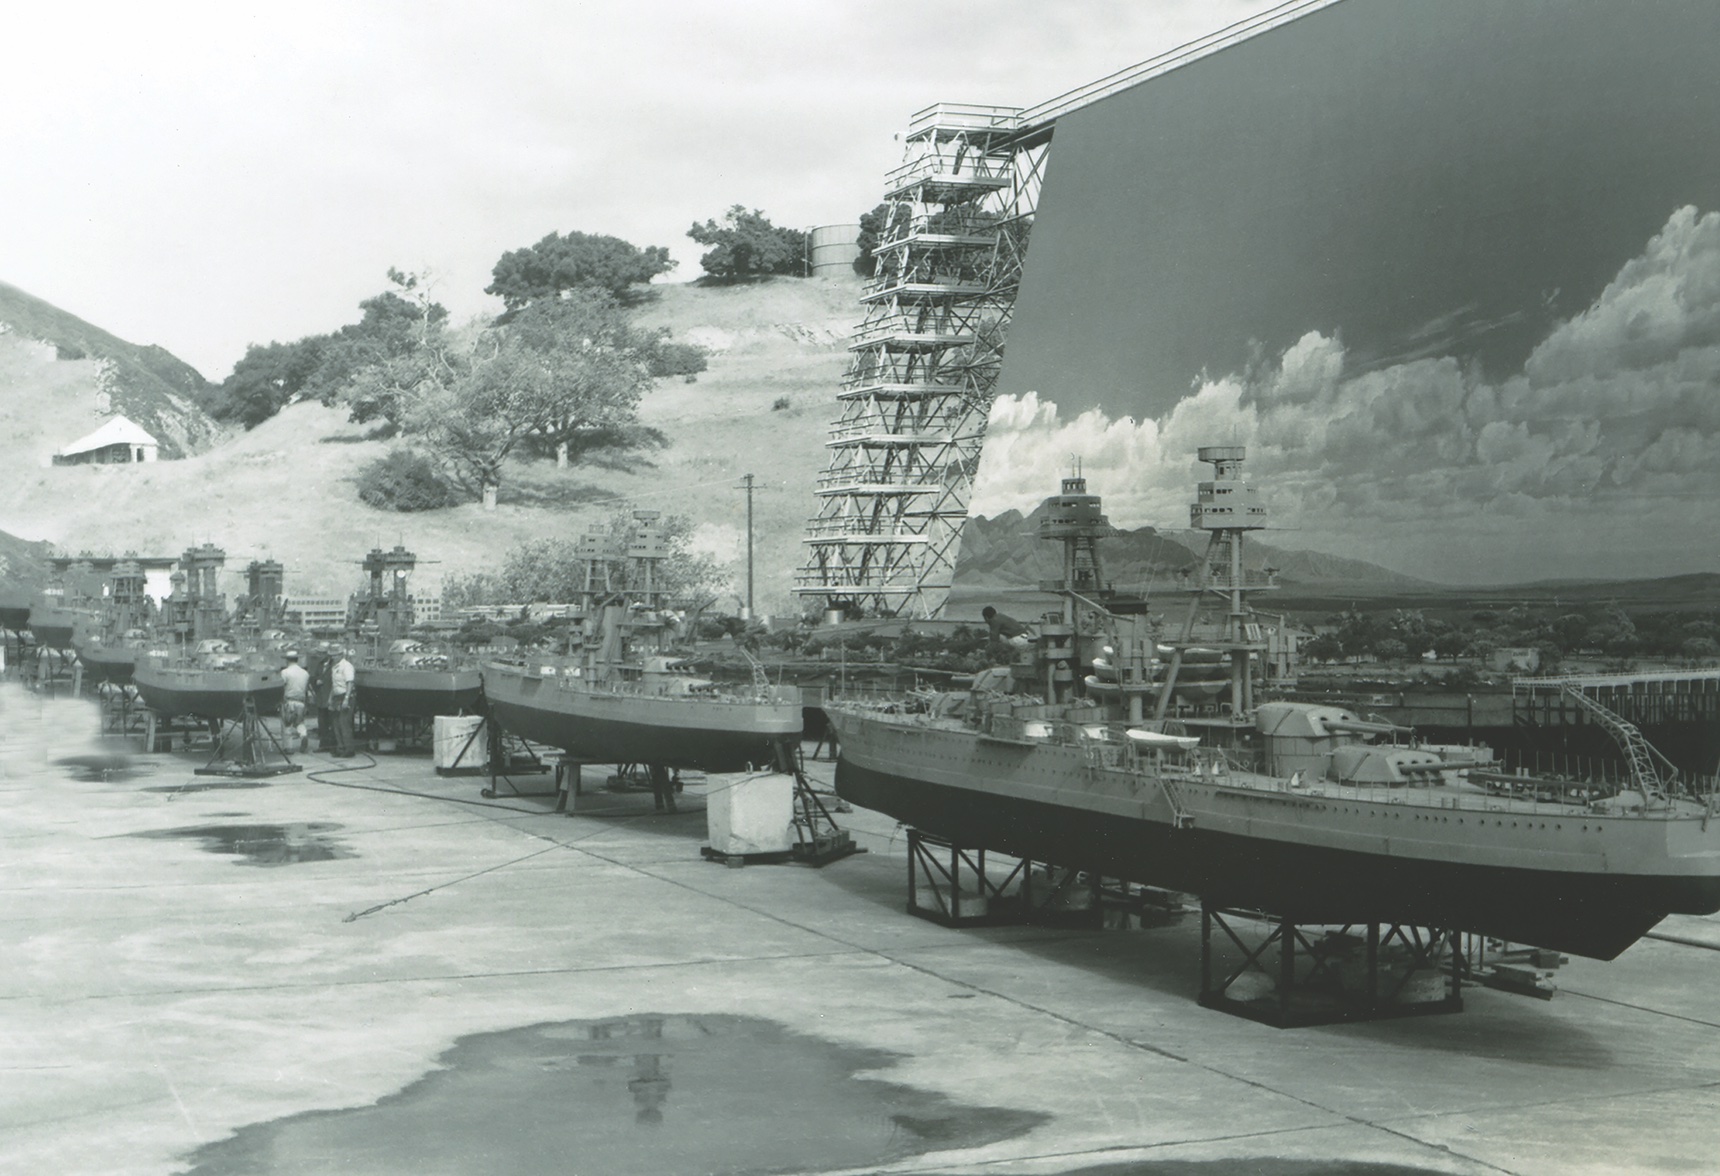 The miniatures department at Twentieth Century Fox built 29 scale-model ships for Tora! Tora! Tora! Some are shown here in front of the studio’s Sersen tank, with the mammoth “sky drop” in the background. (University of New Mexico)